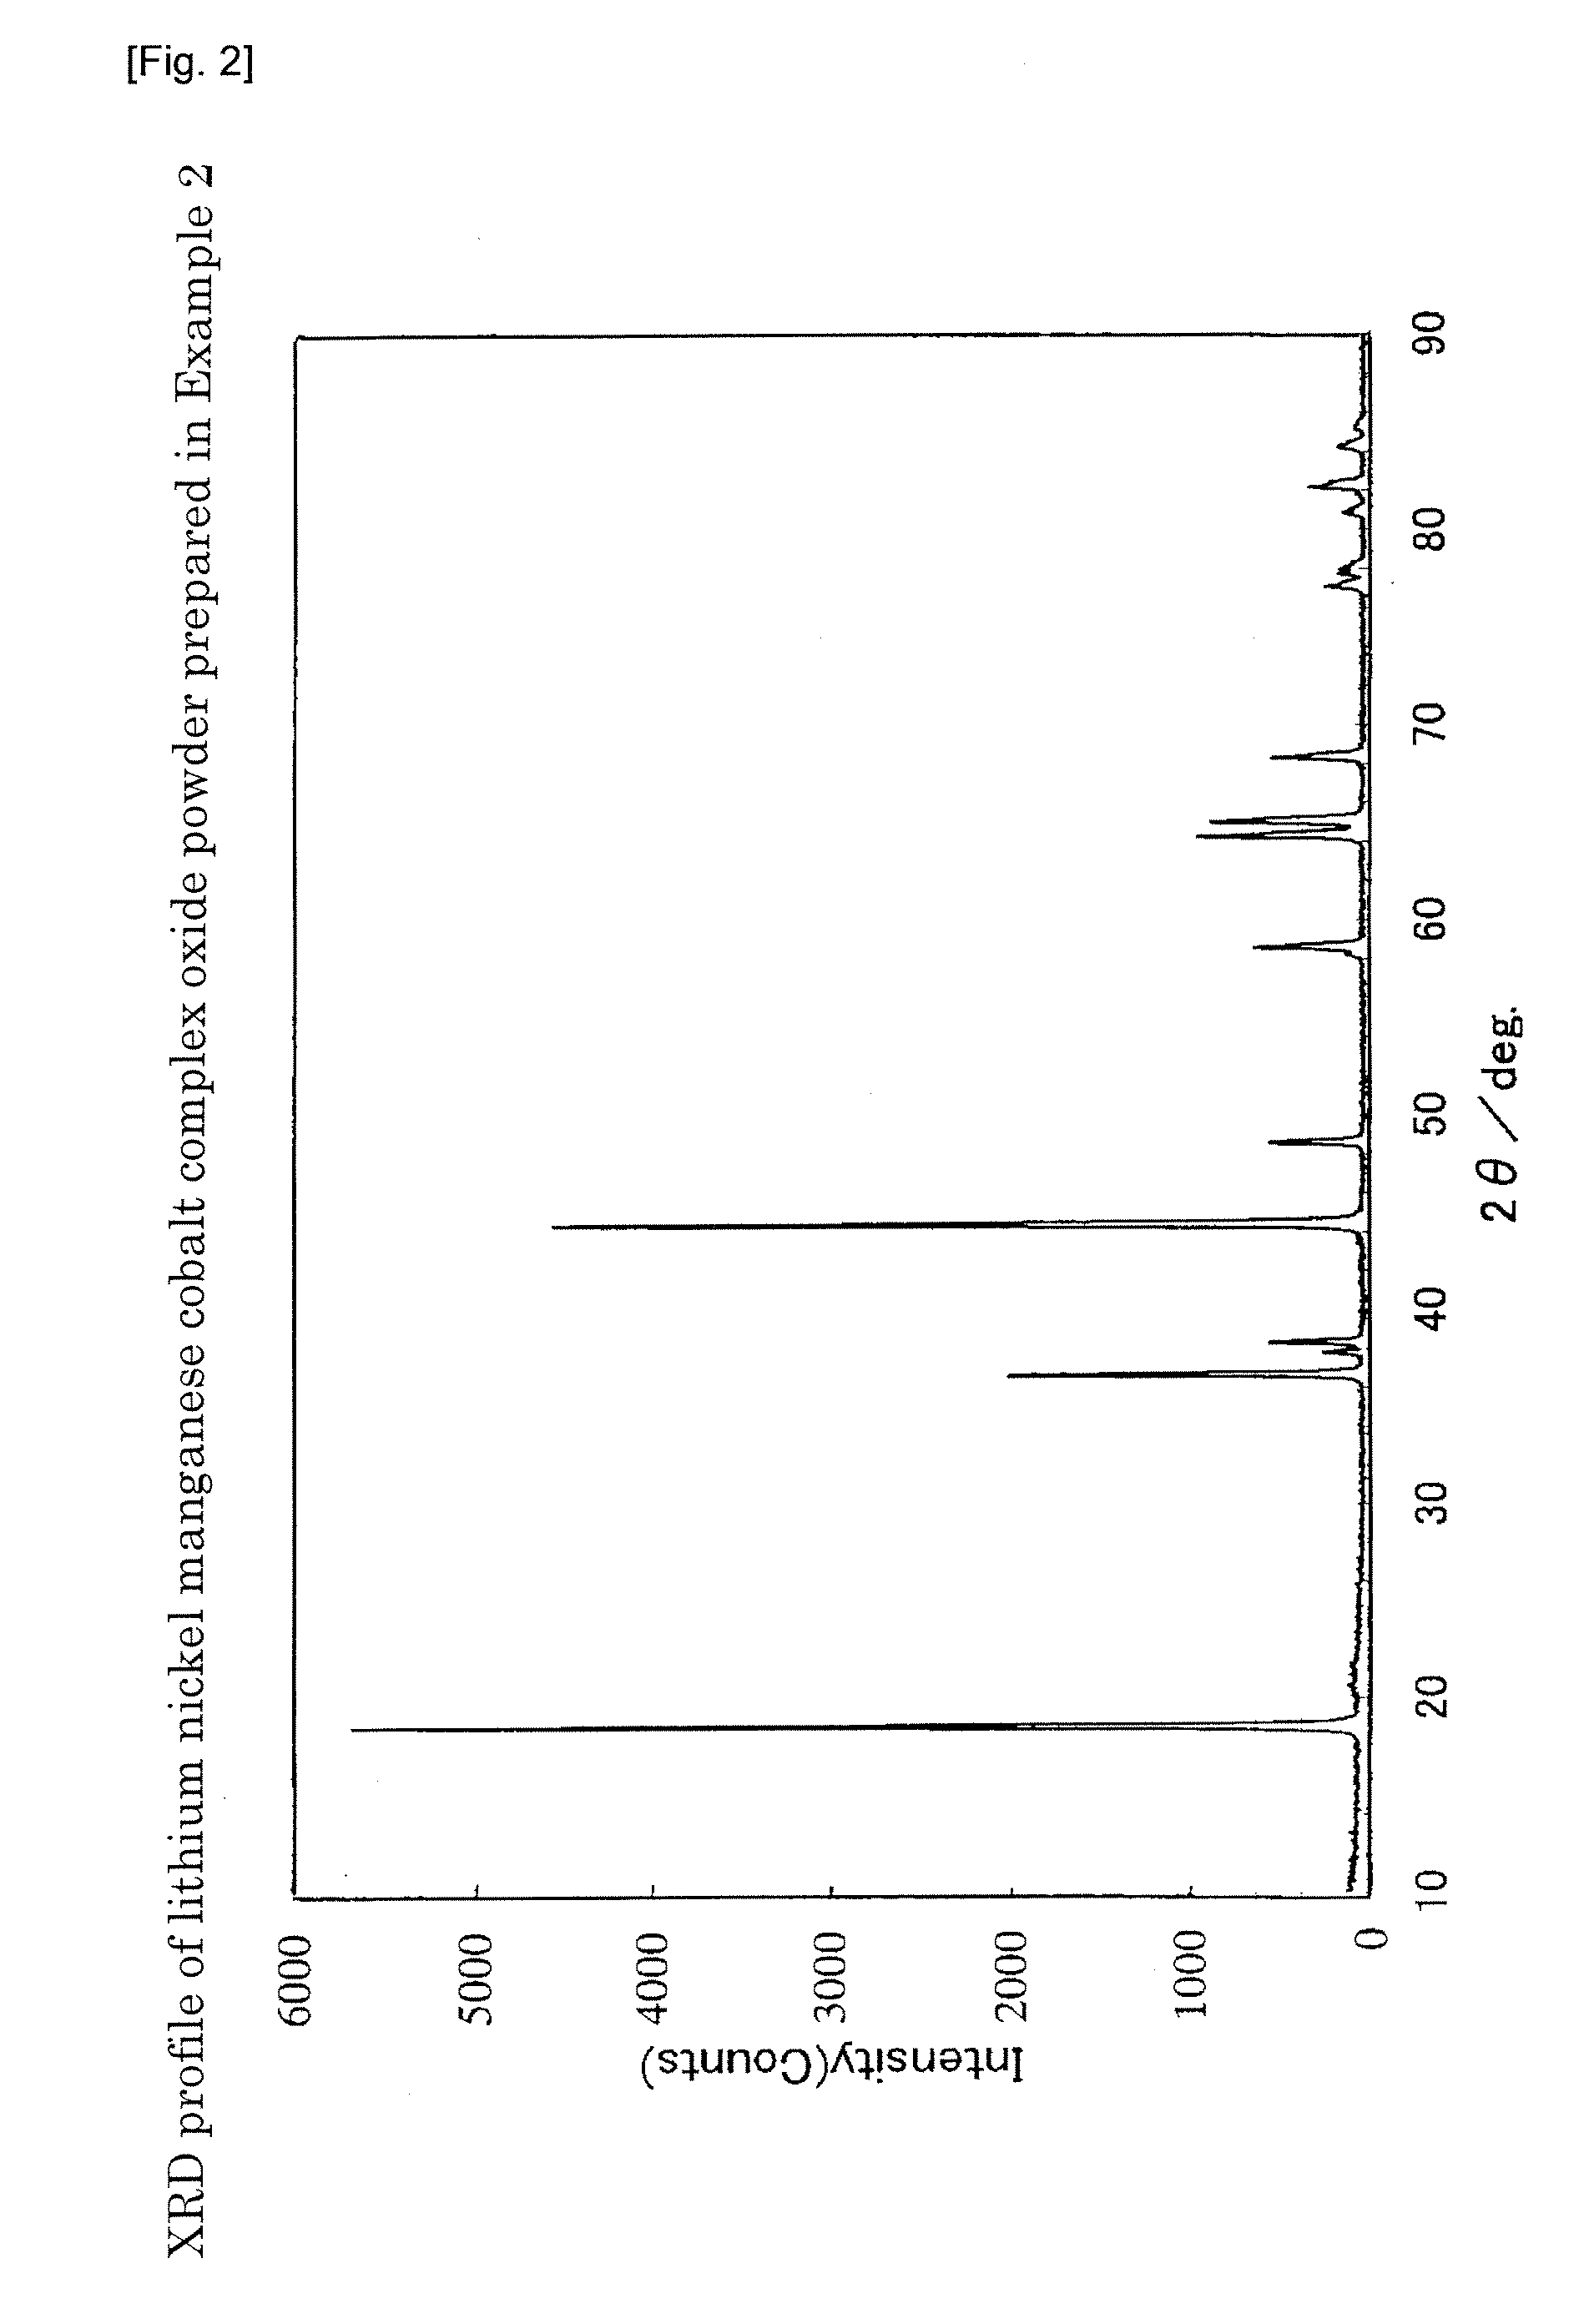 Lithium secondary battery and positive electrode material thereof